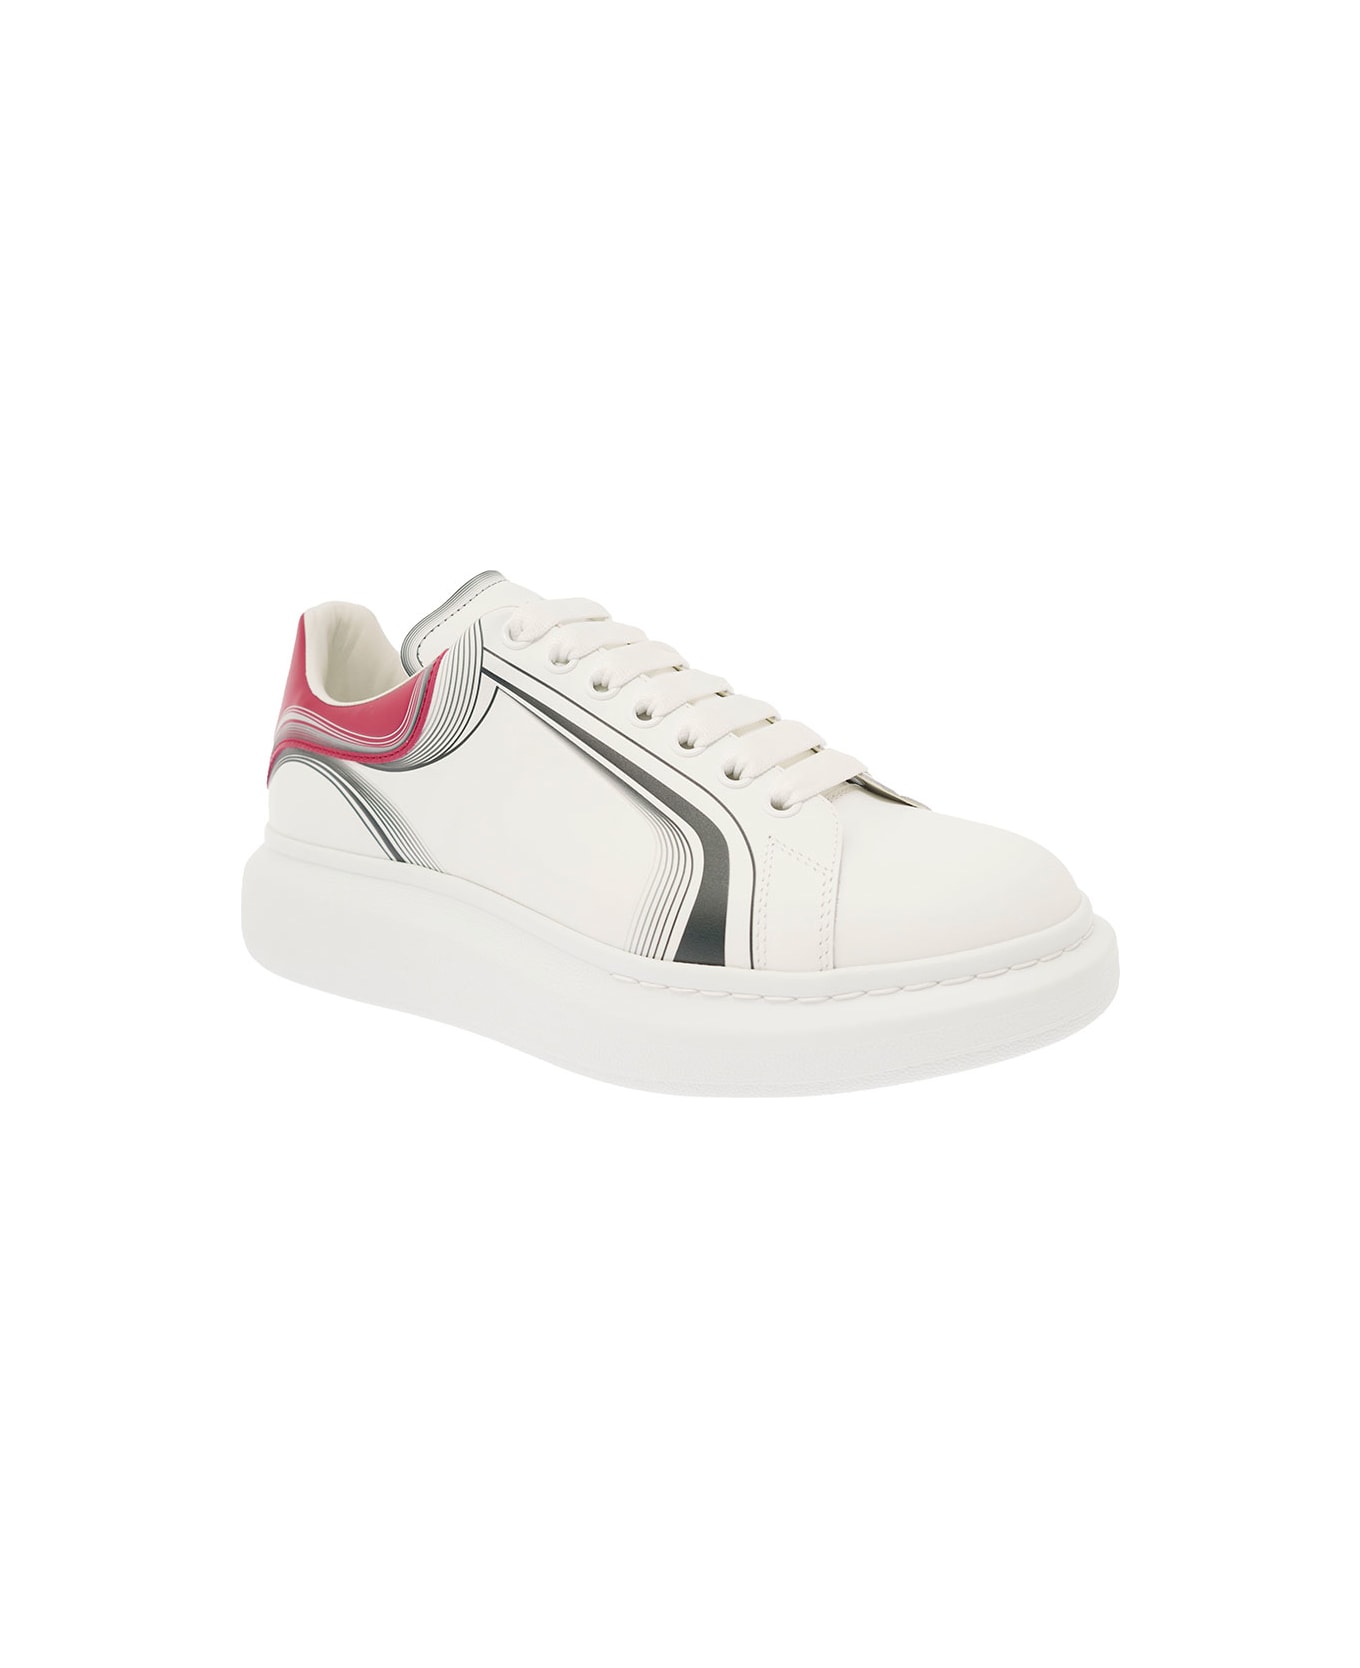 Alexander McQueen Sneakers With Oversized Sole And Graphic Details - Bianco